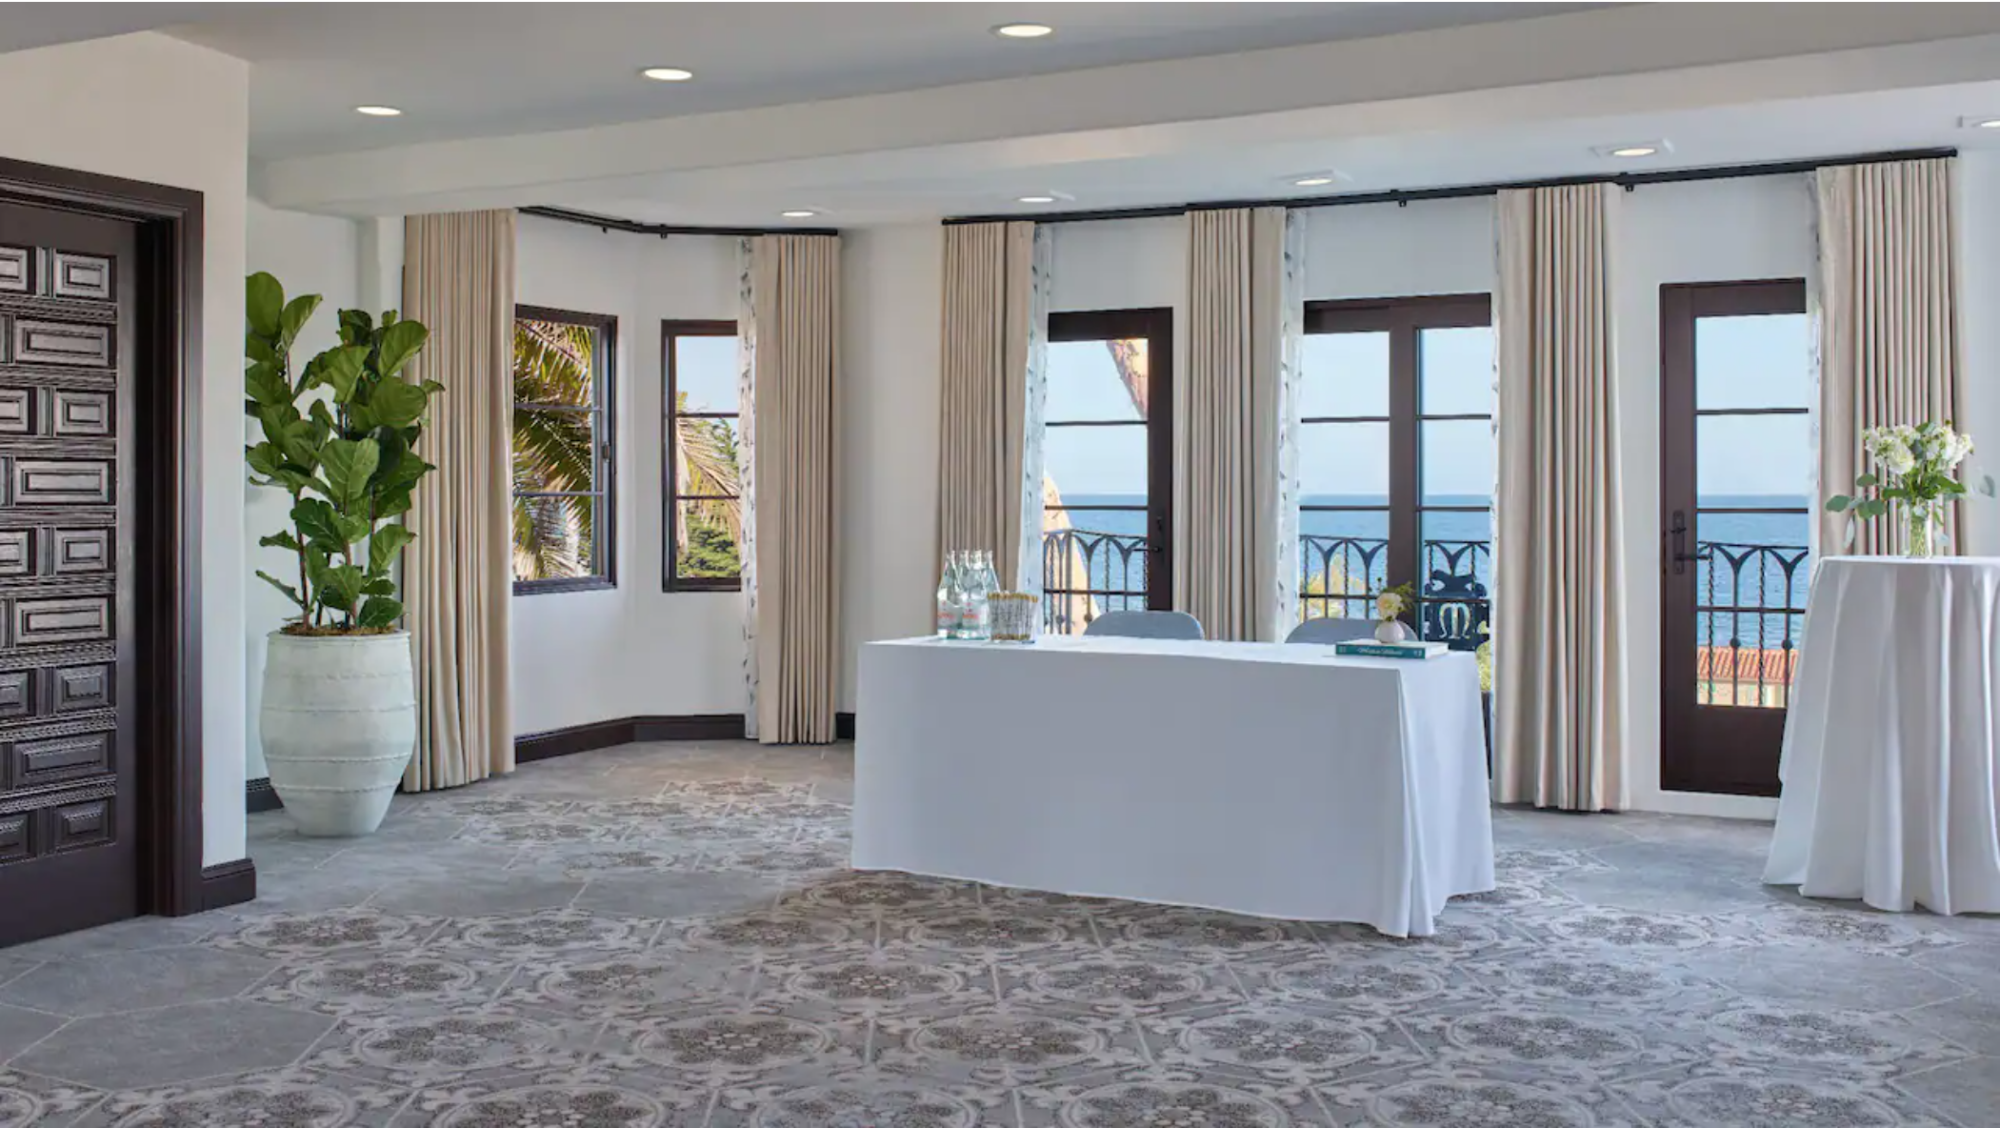 Tables with white linens and drinking glasses and floral centerpieces in front of porch overlooking ocean at Mar Monte Hotel in Santa Barbara, CA